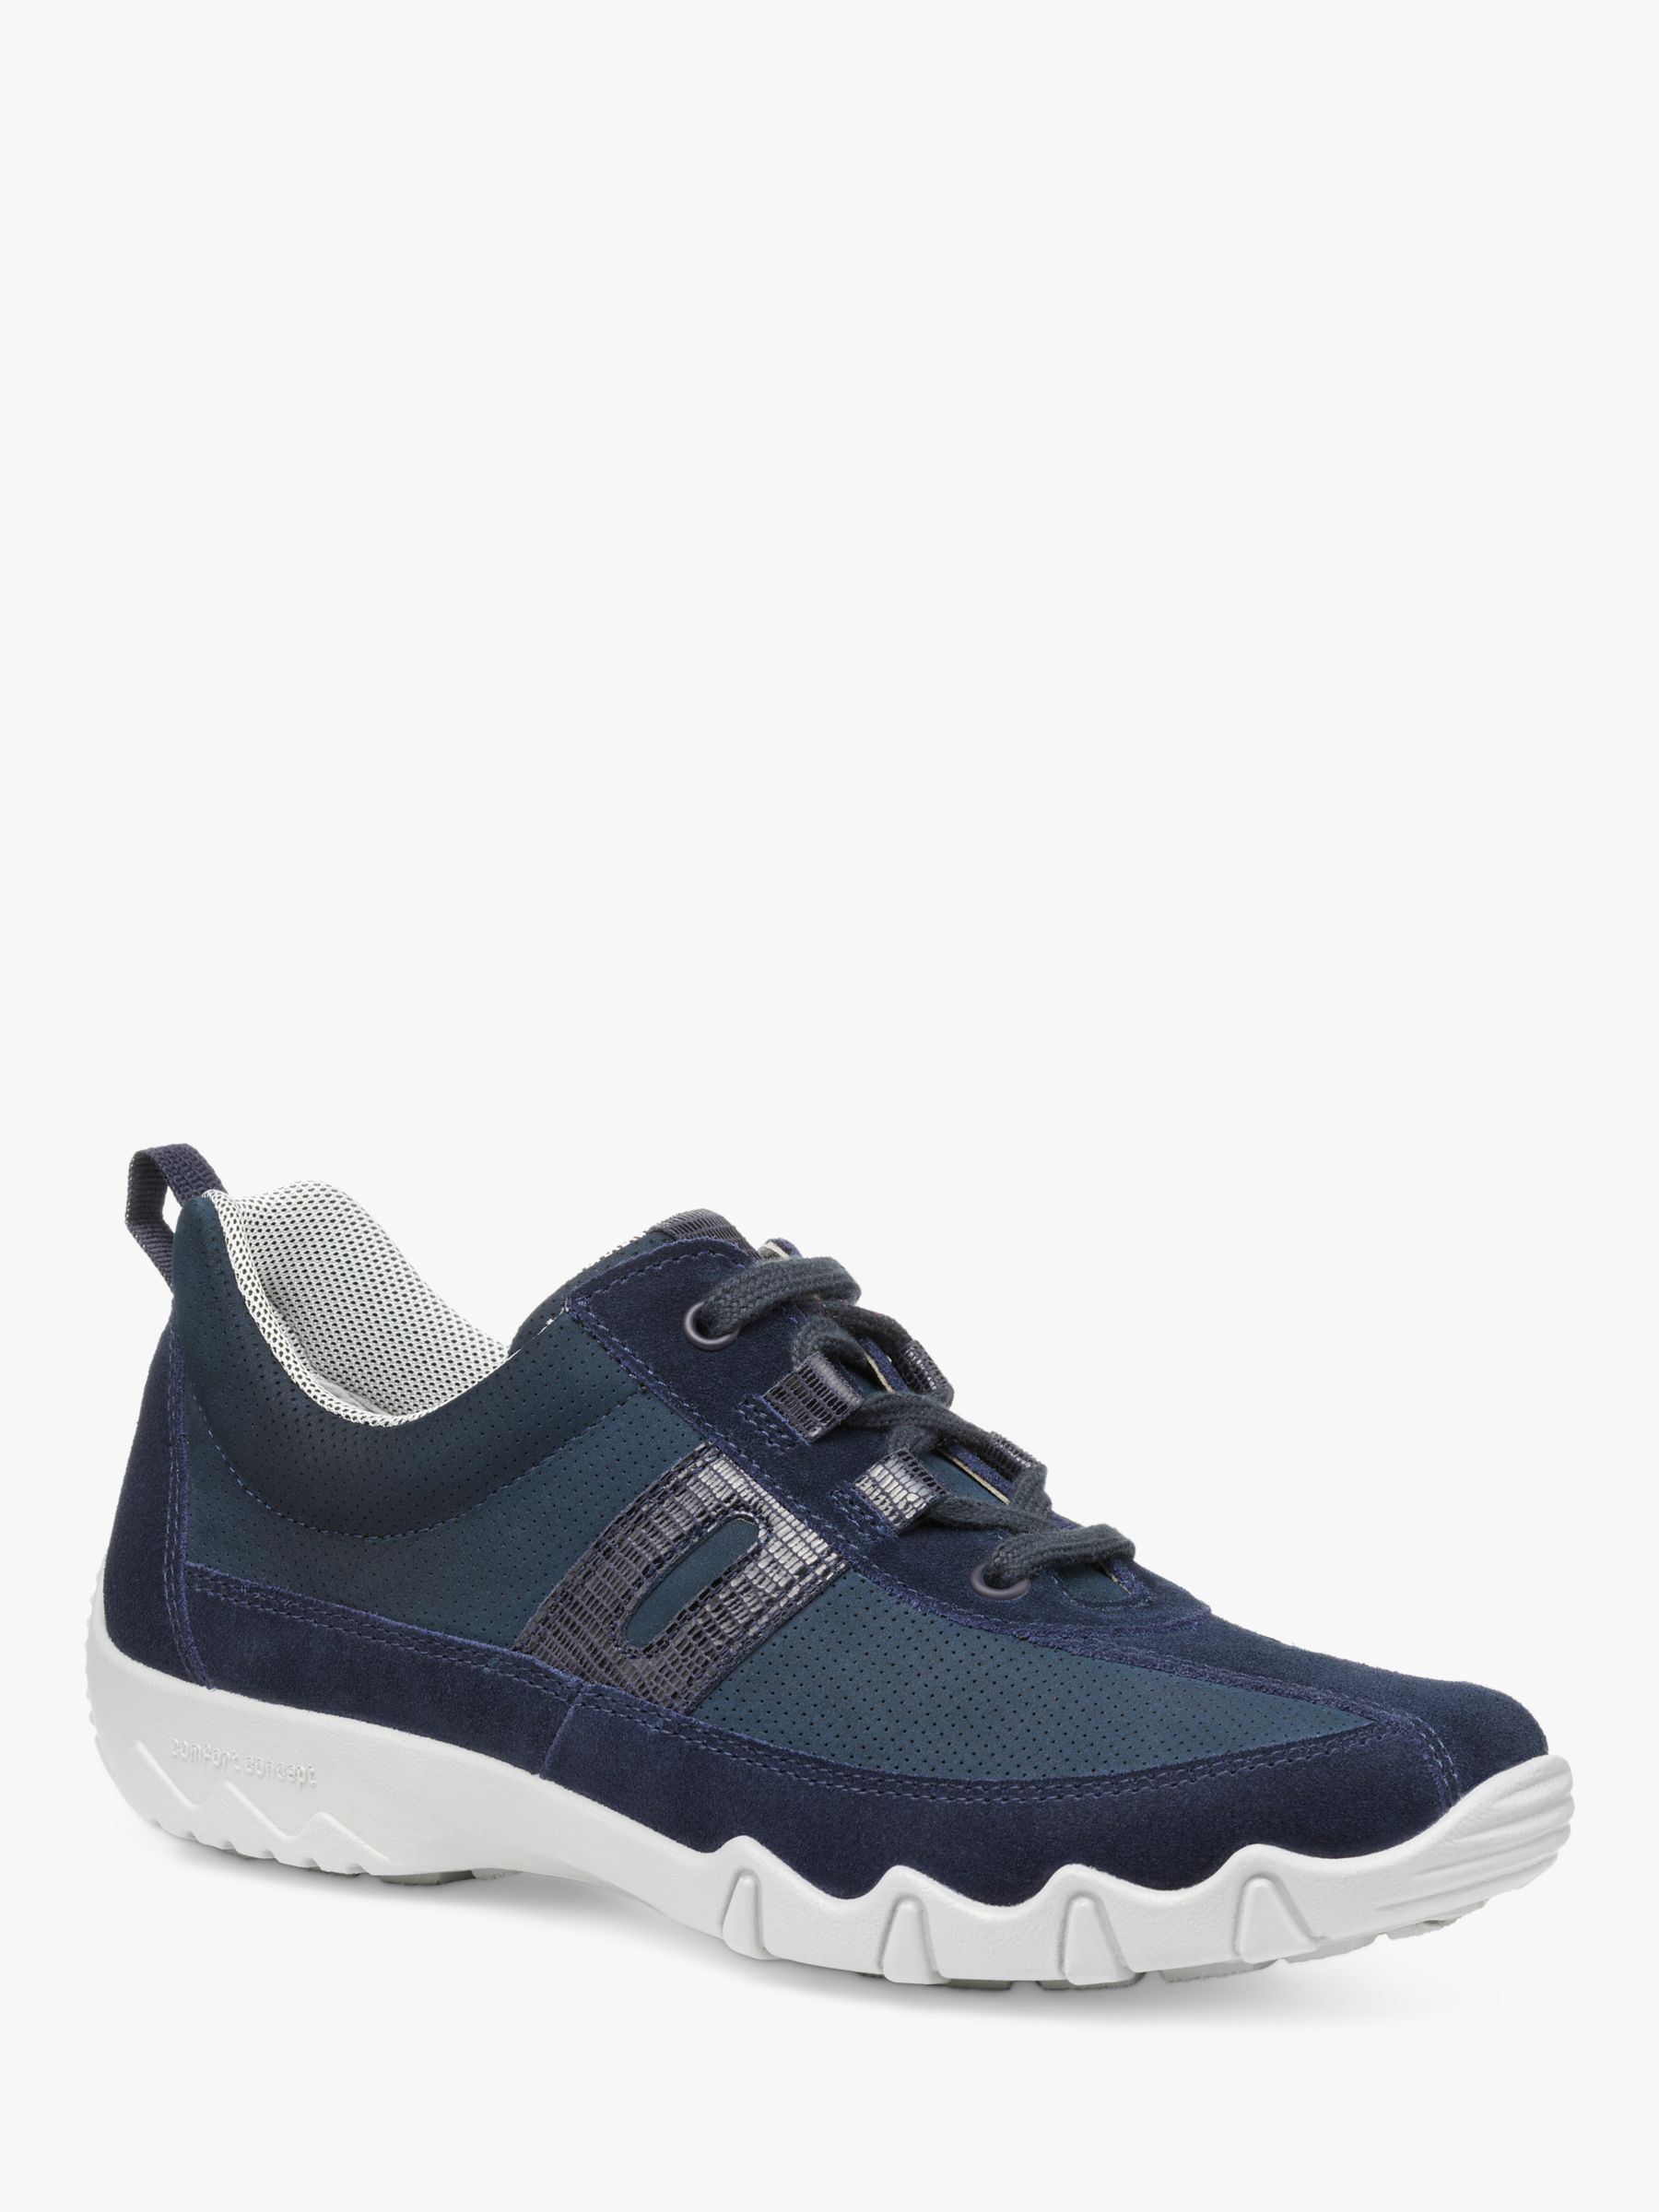 Buy Hotter Leanne II Wide Fit Suede and Nubuck Trainers, Navy Online at johnlewis.com